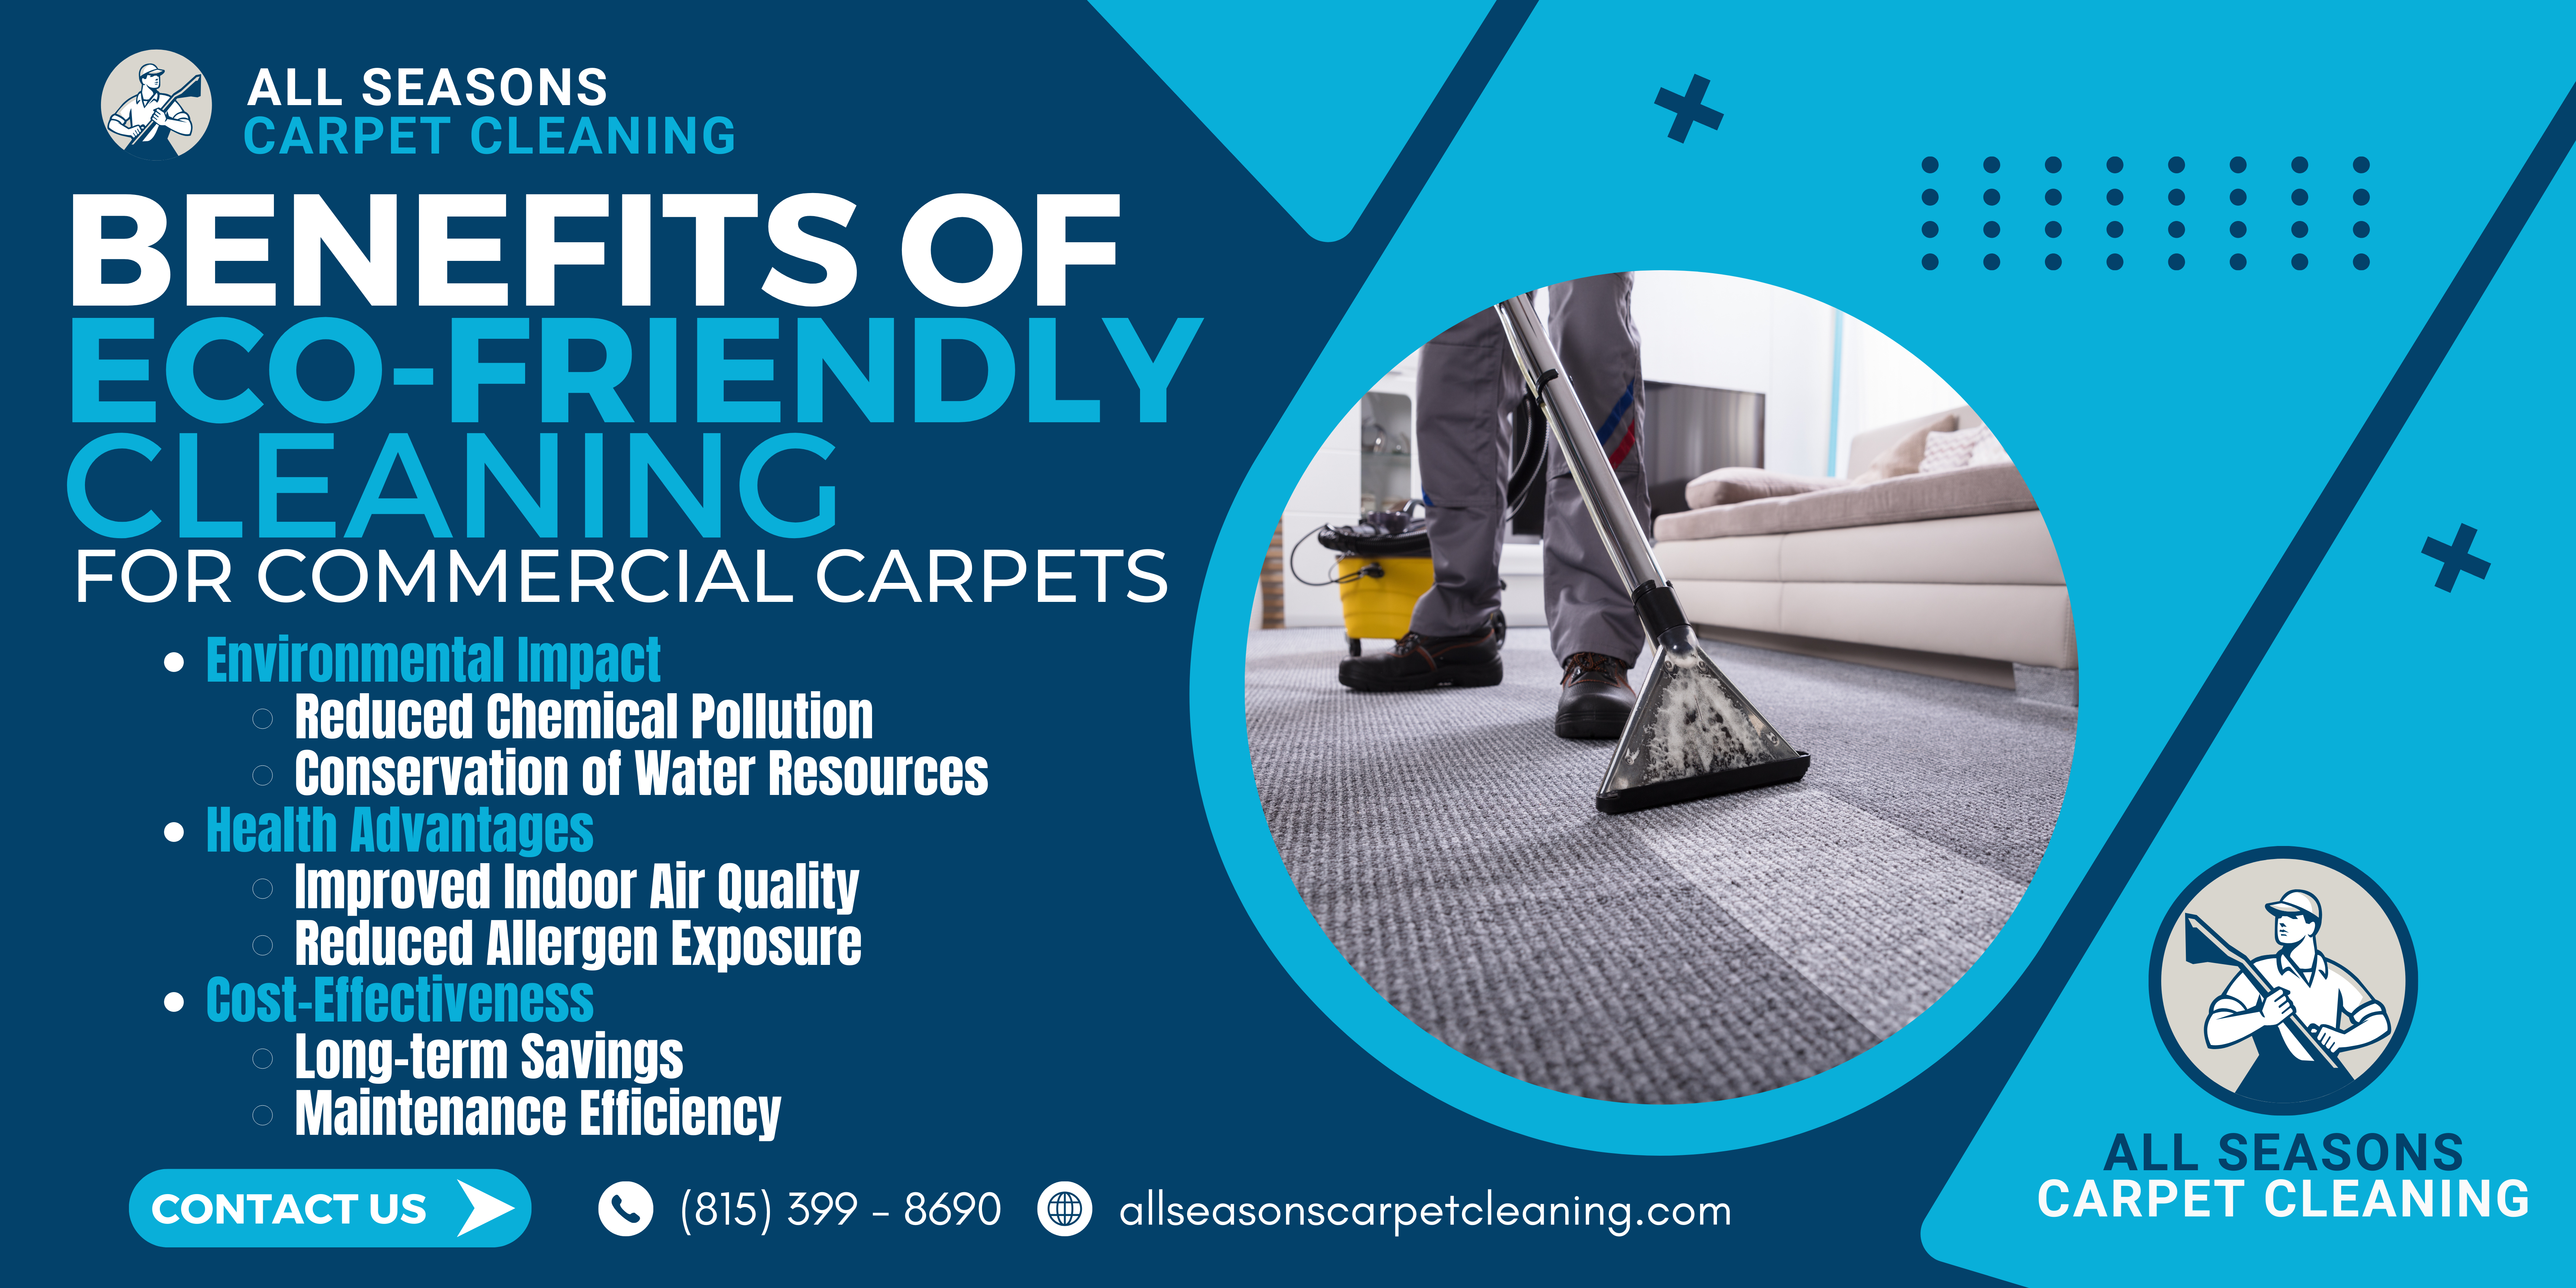 Eco-friendly and green cleaning options for commercial carpets